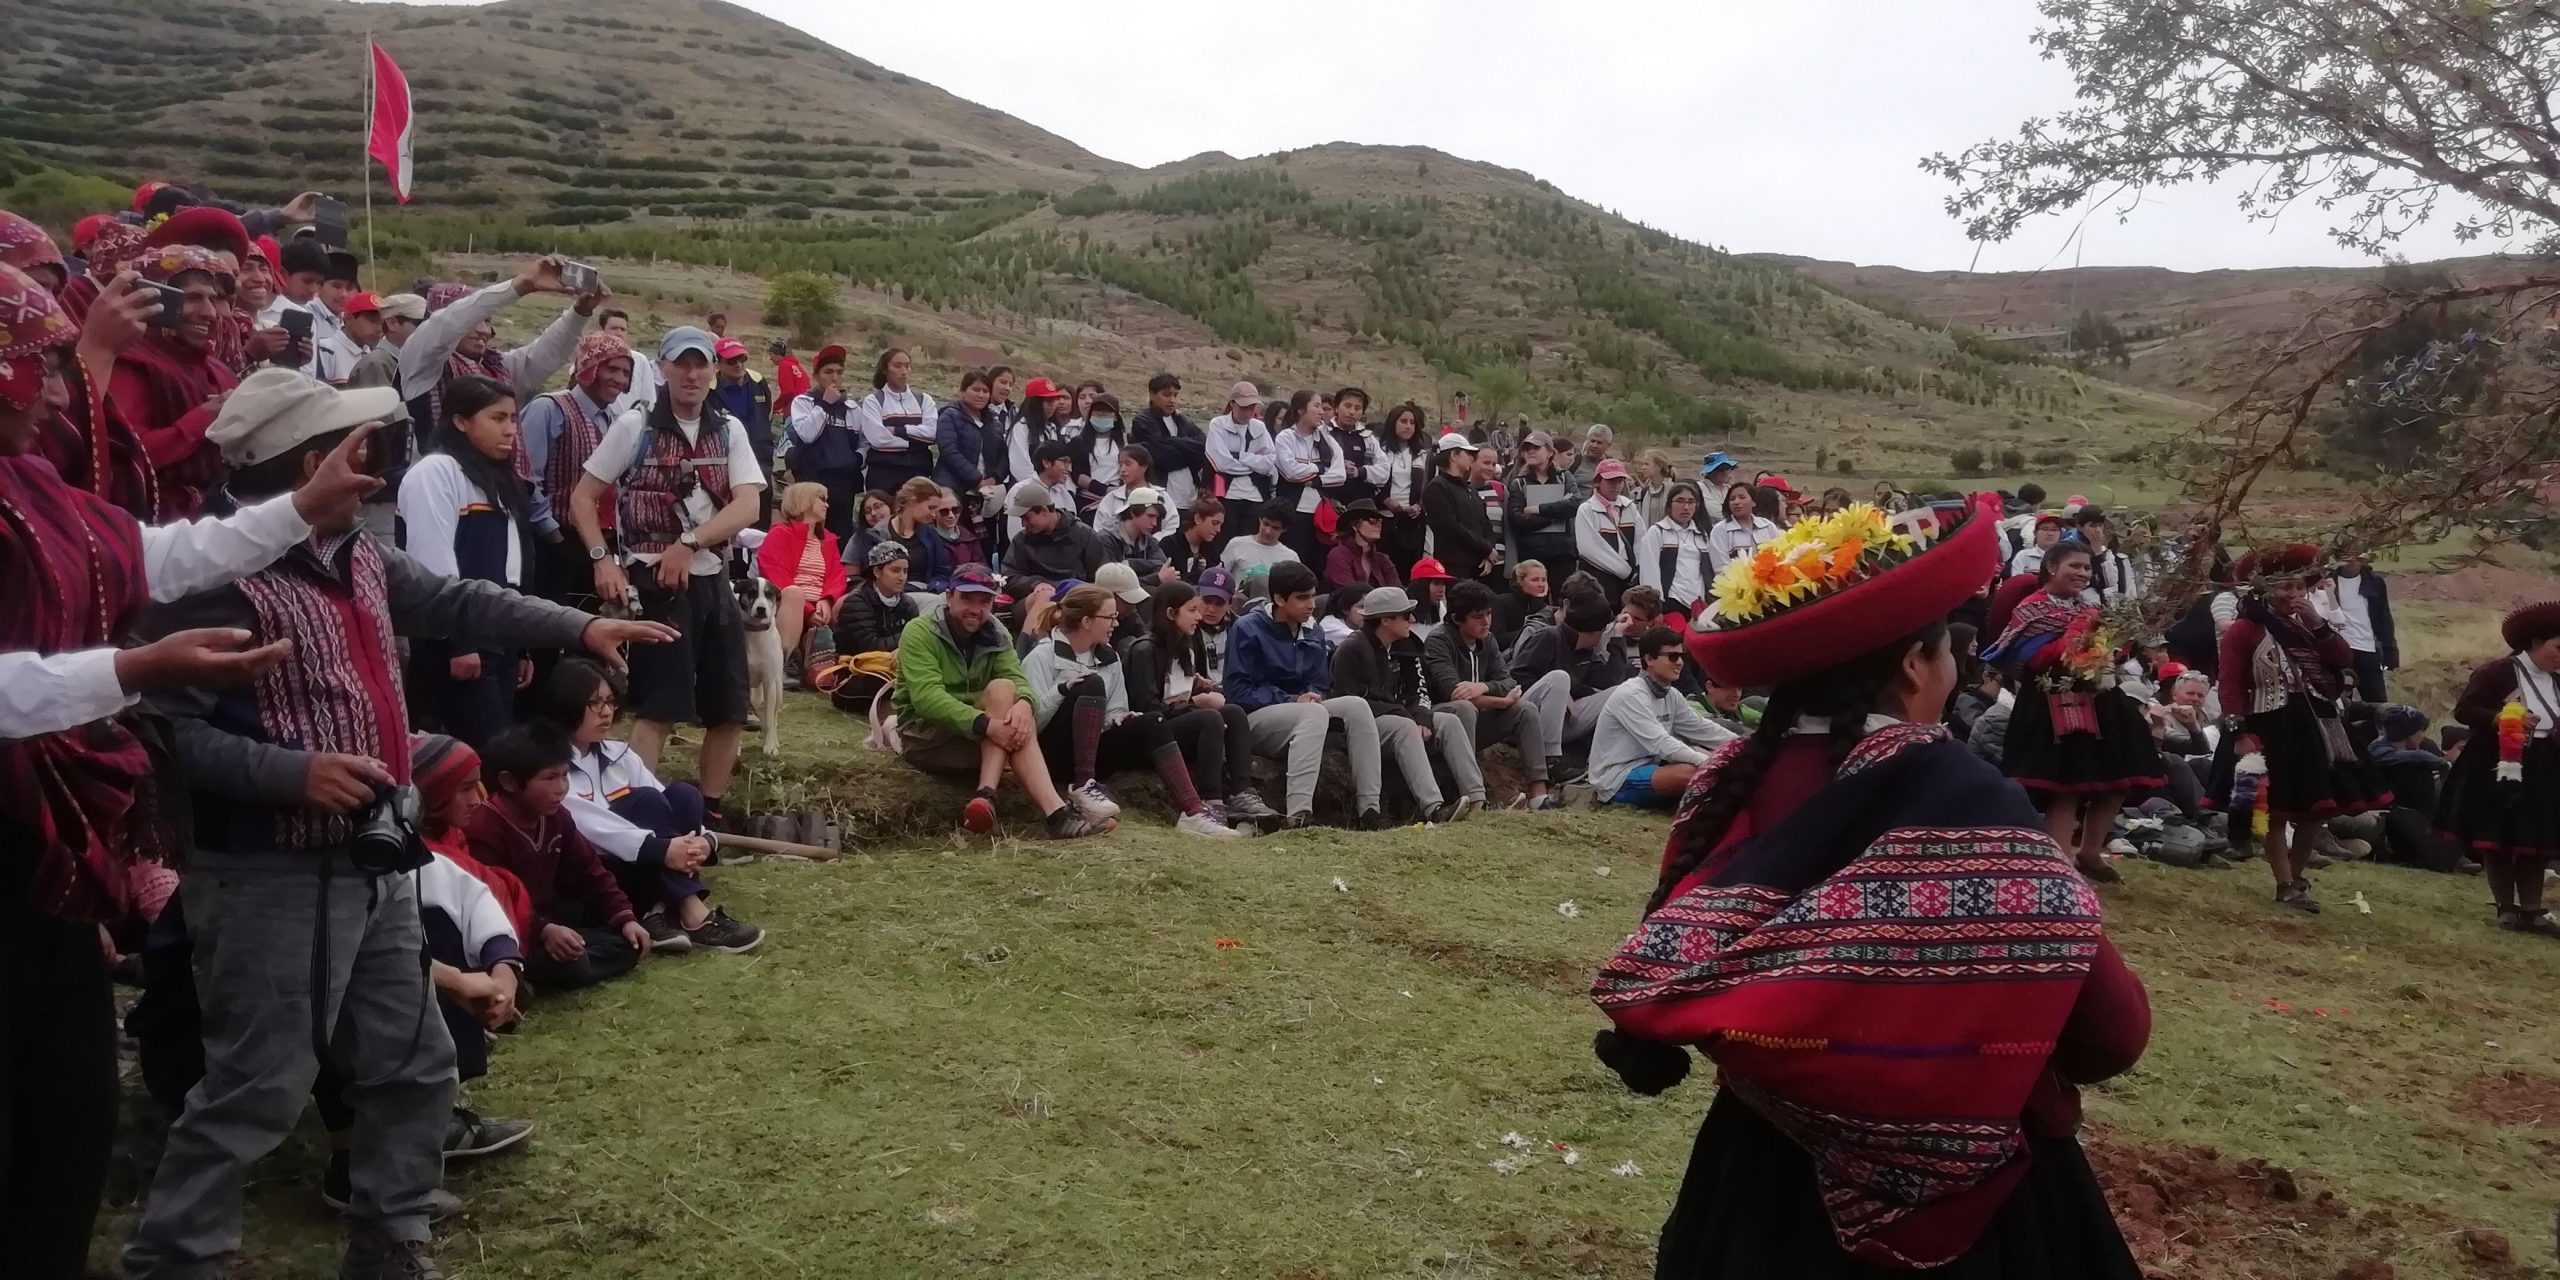 100 students from COAR Cuzco joined S4 students to plant 10,000 trees in the Piuray area